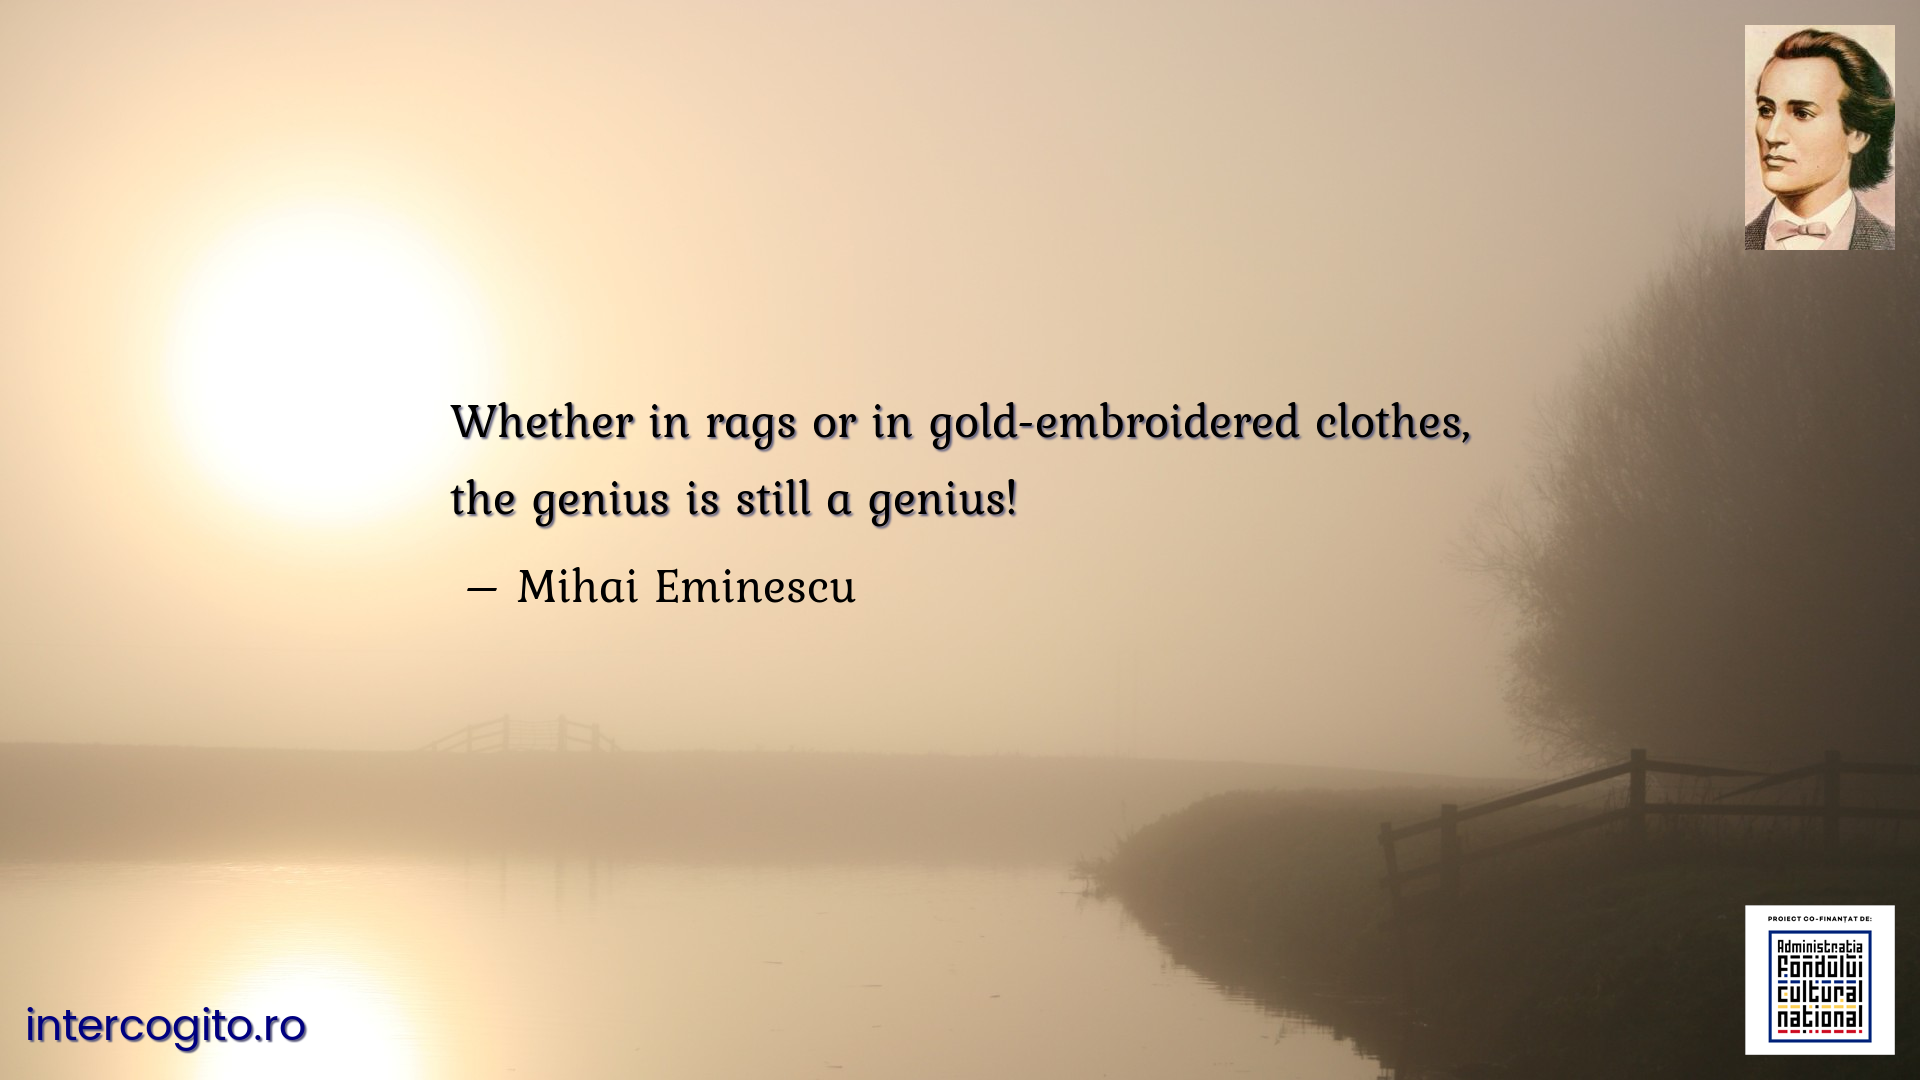 Whether in rags or in gold-embroidered clothes, the genius is still a genius!